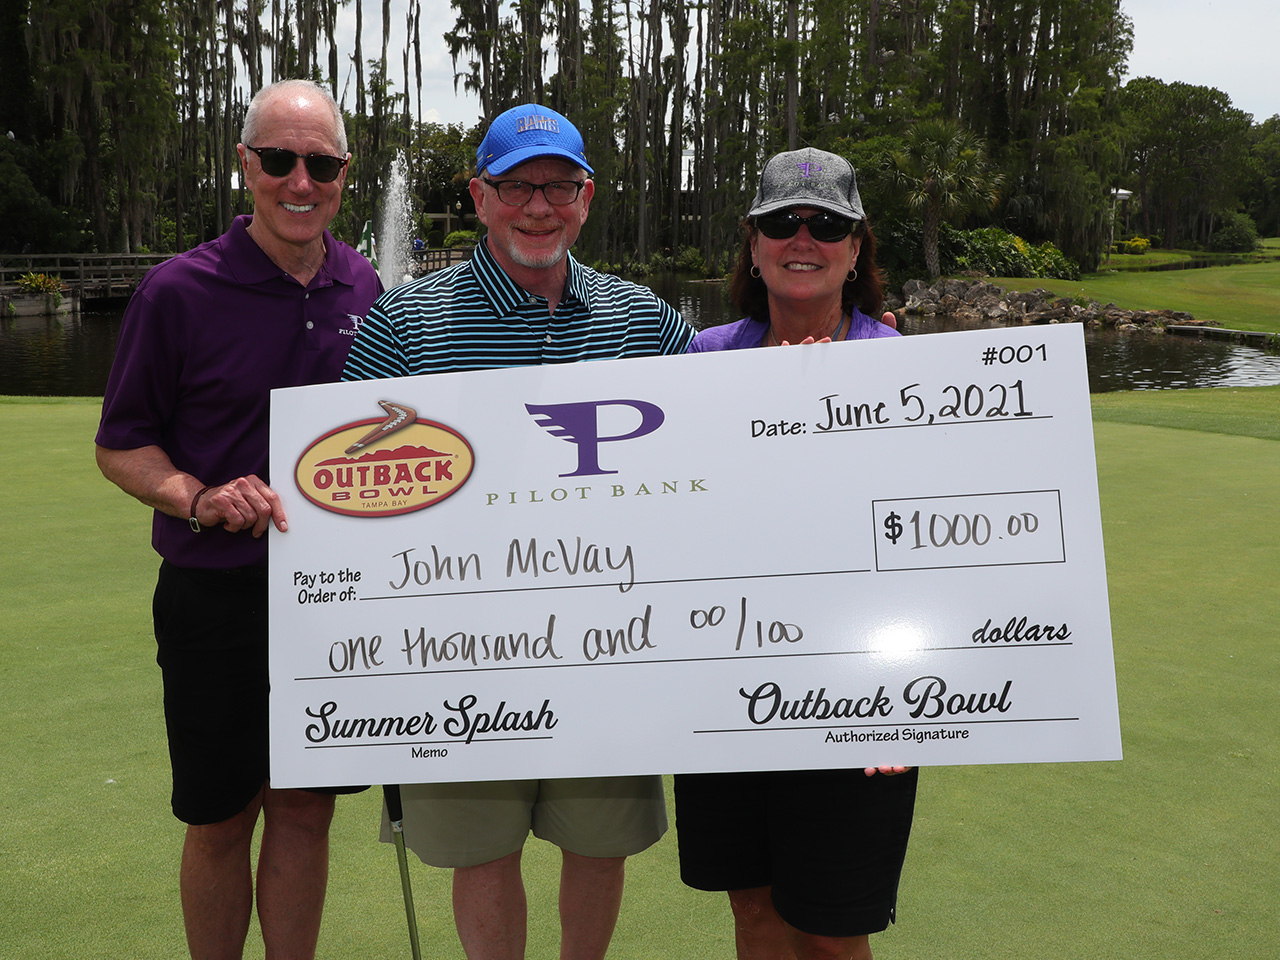 Closest to the Pin in the Shootout wins $1,000